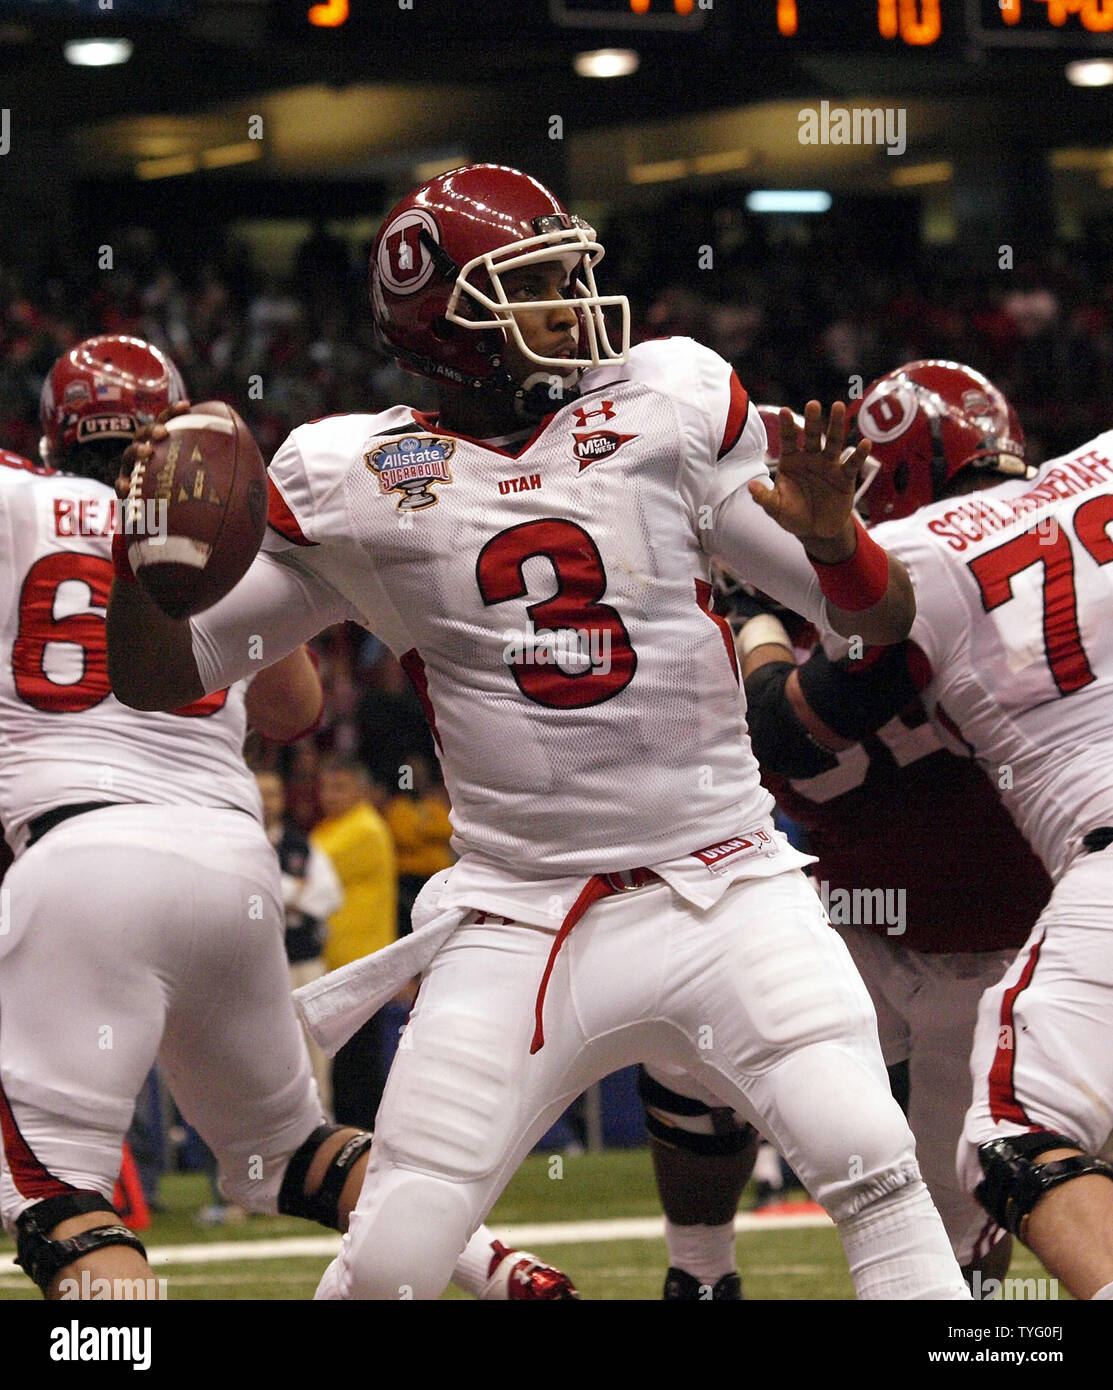 Utah quarterback Brian Johnson takes aim at a receiver in the third quarter of the Allstate Sugar Bowl at the Superdome in New Orleans on January 2, 2009. Johnson was named MVP of the game.      (UPI Photo/Dave Fornell) Stock Photo